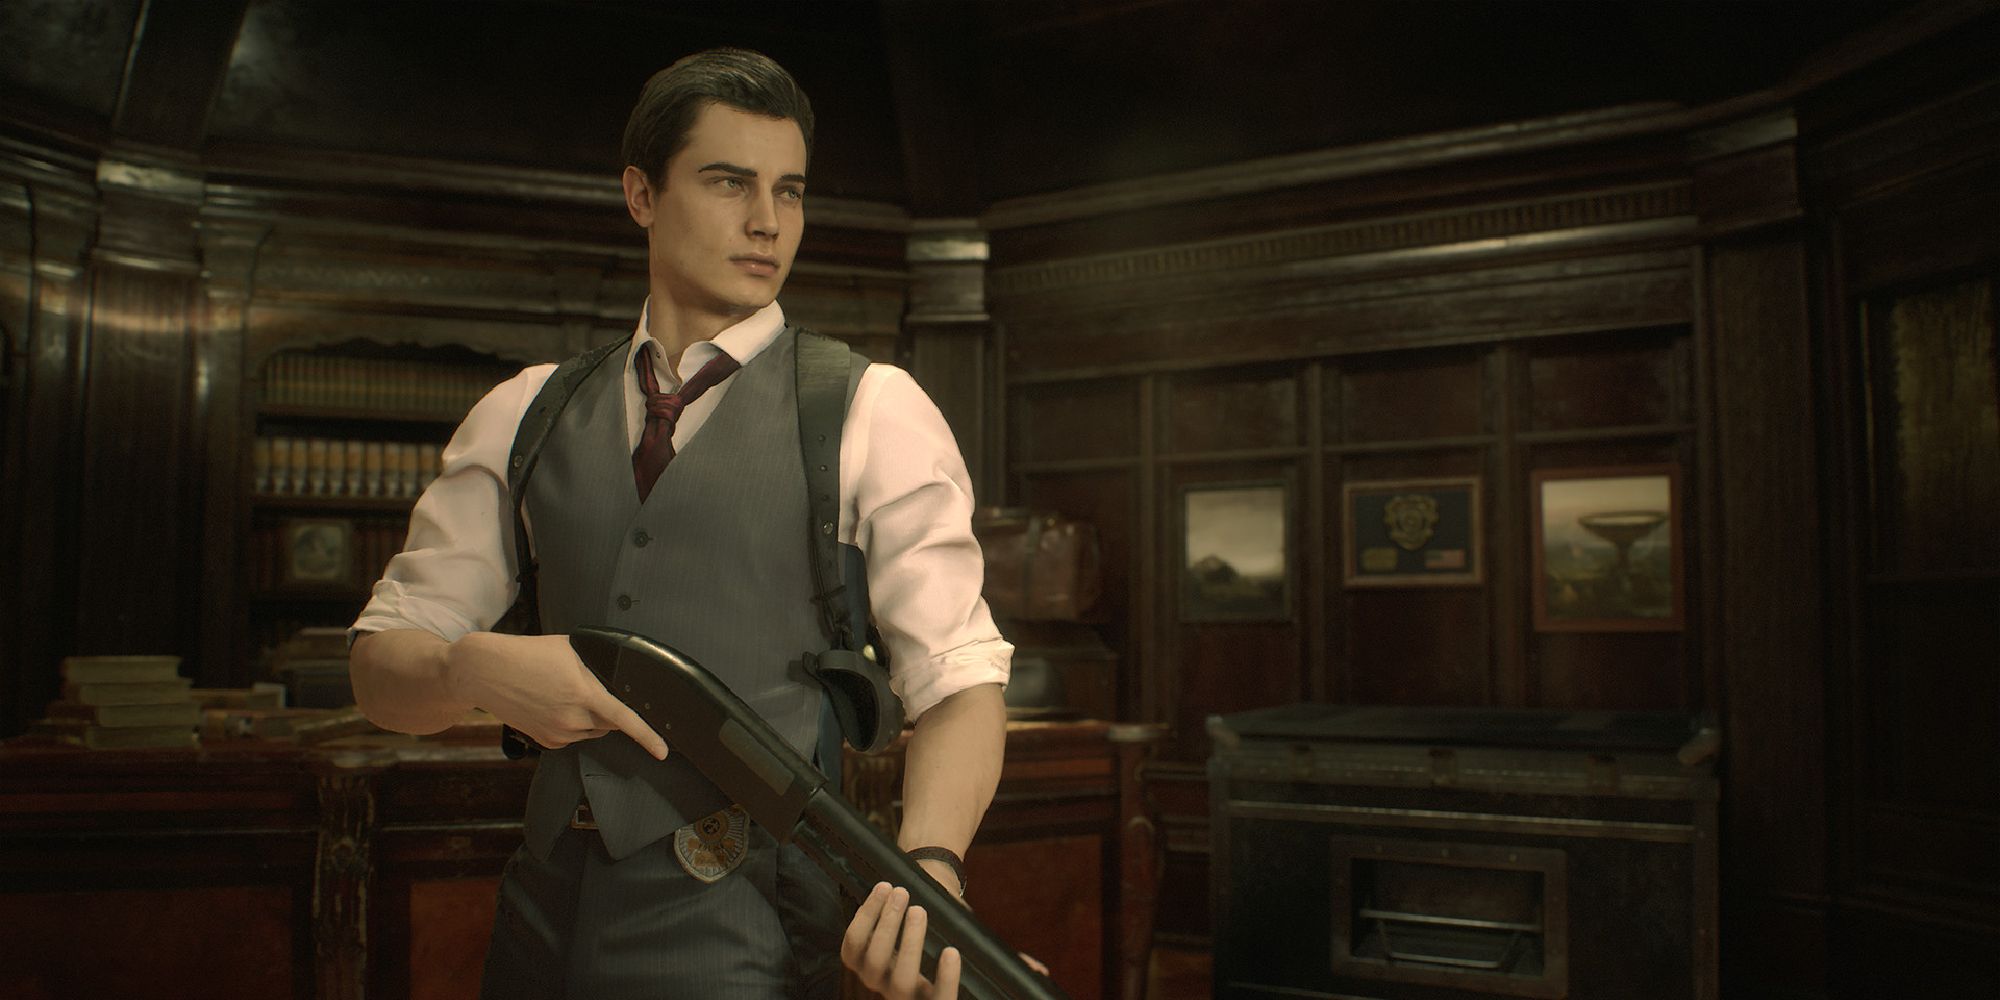 Leon in the Noire alternative outfit, holding his shotgun in a neutral stance. 